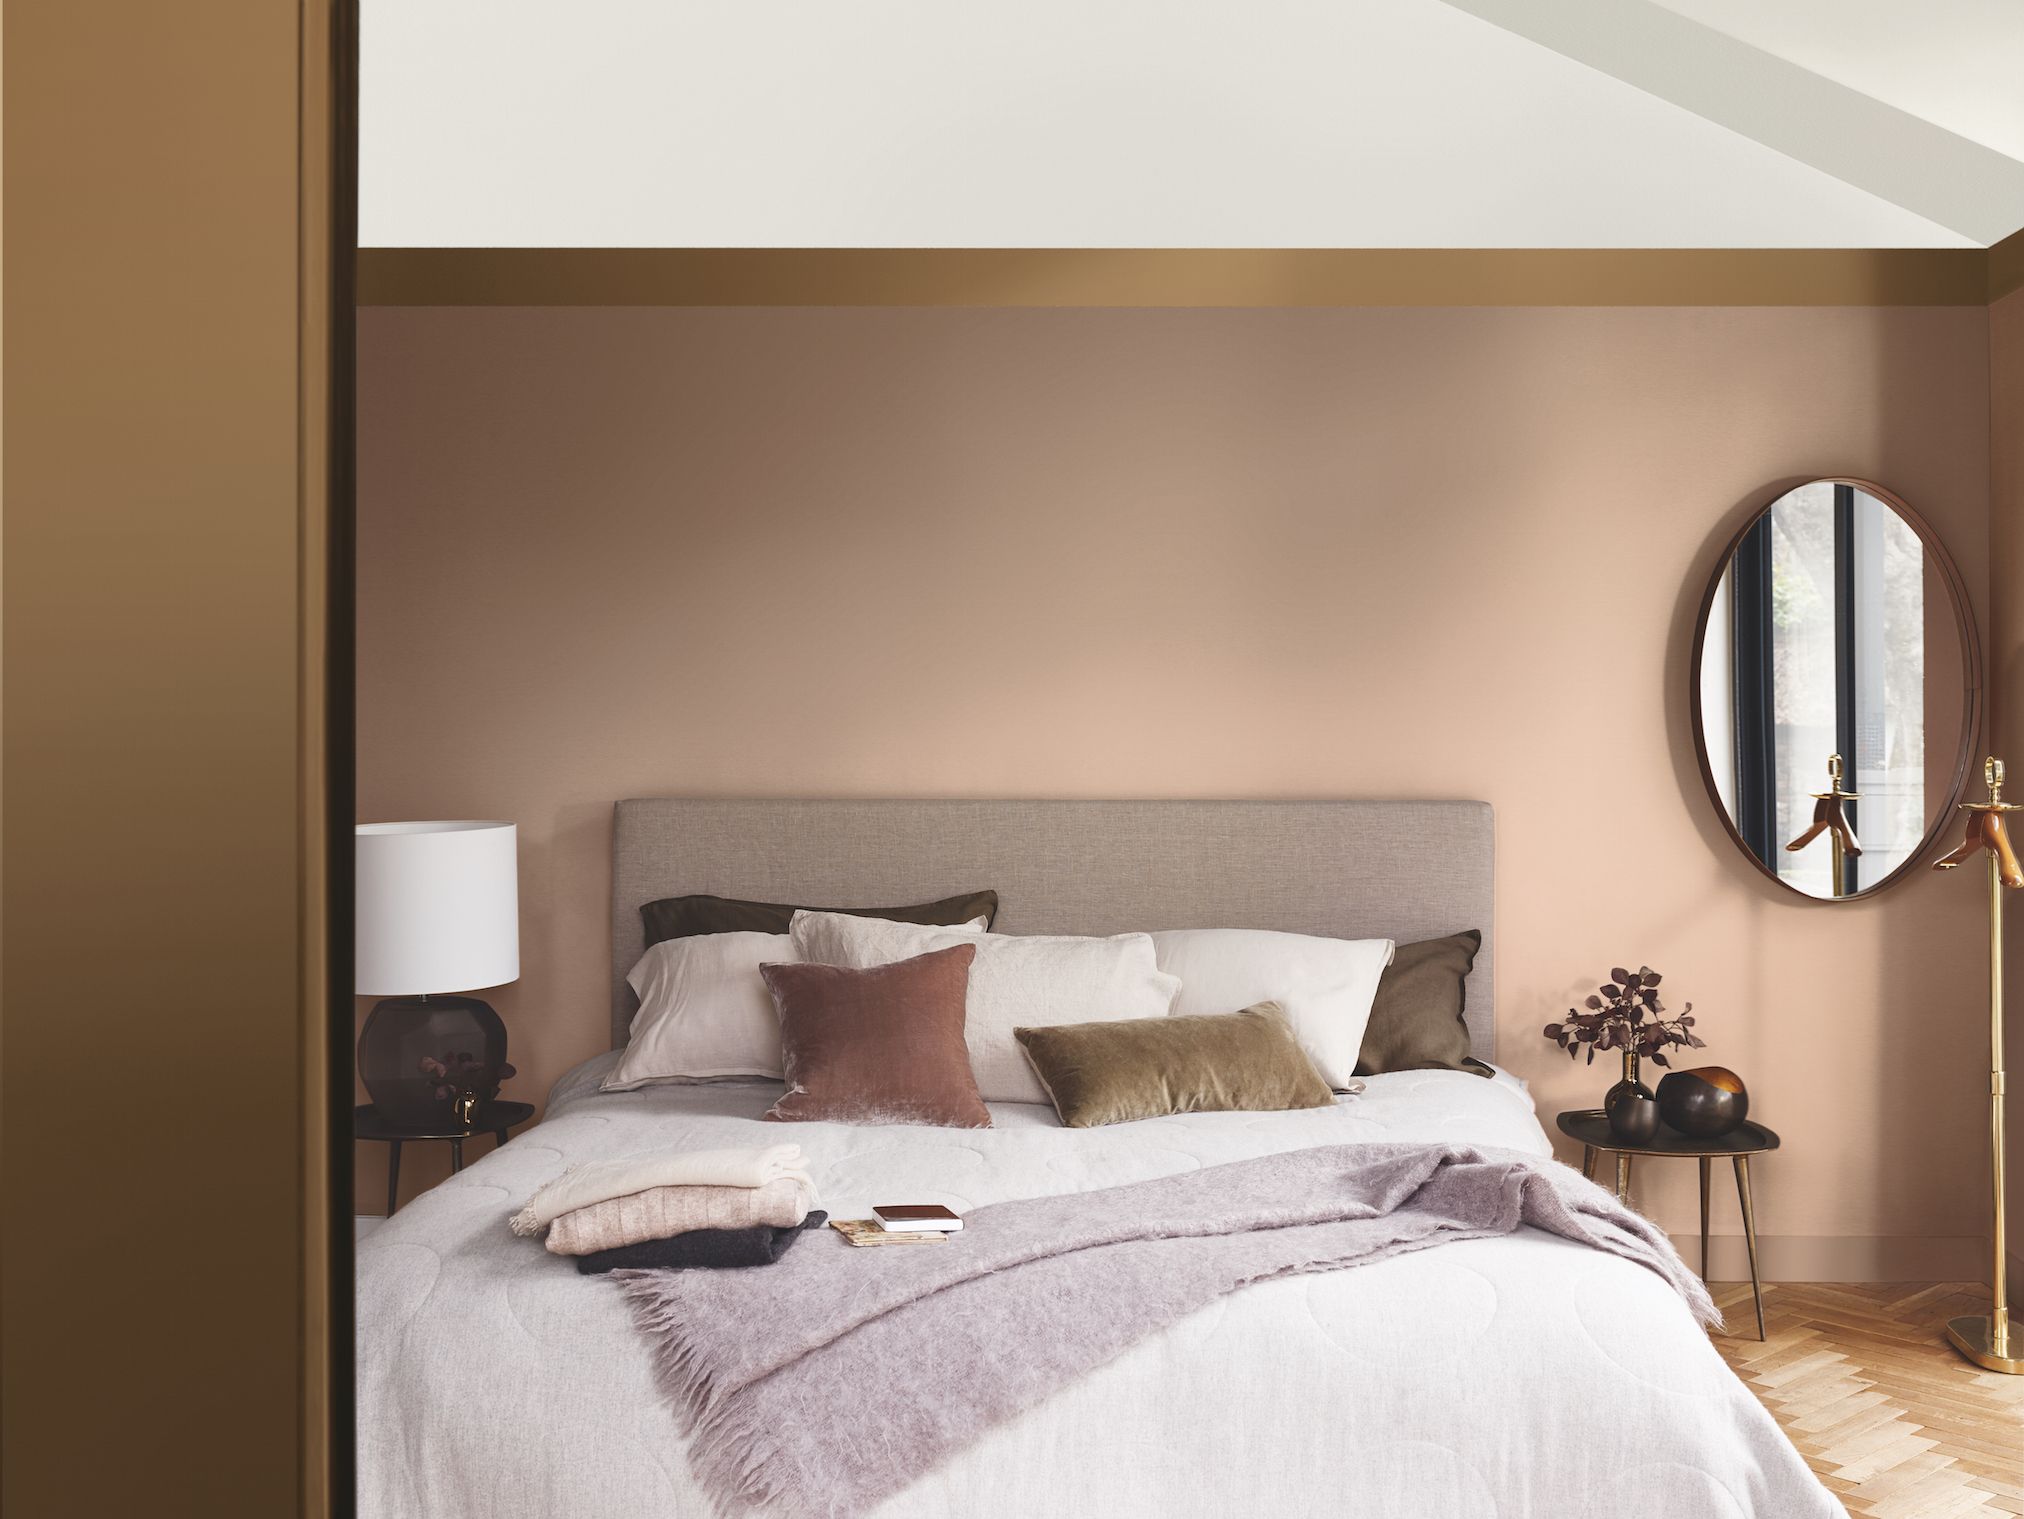 Dulux Colour Futures Colour Of The Year 2019 A Place To Think Bedroom Inspiration Global Bc 36c 1539613738 